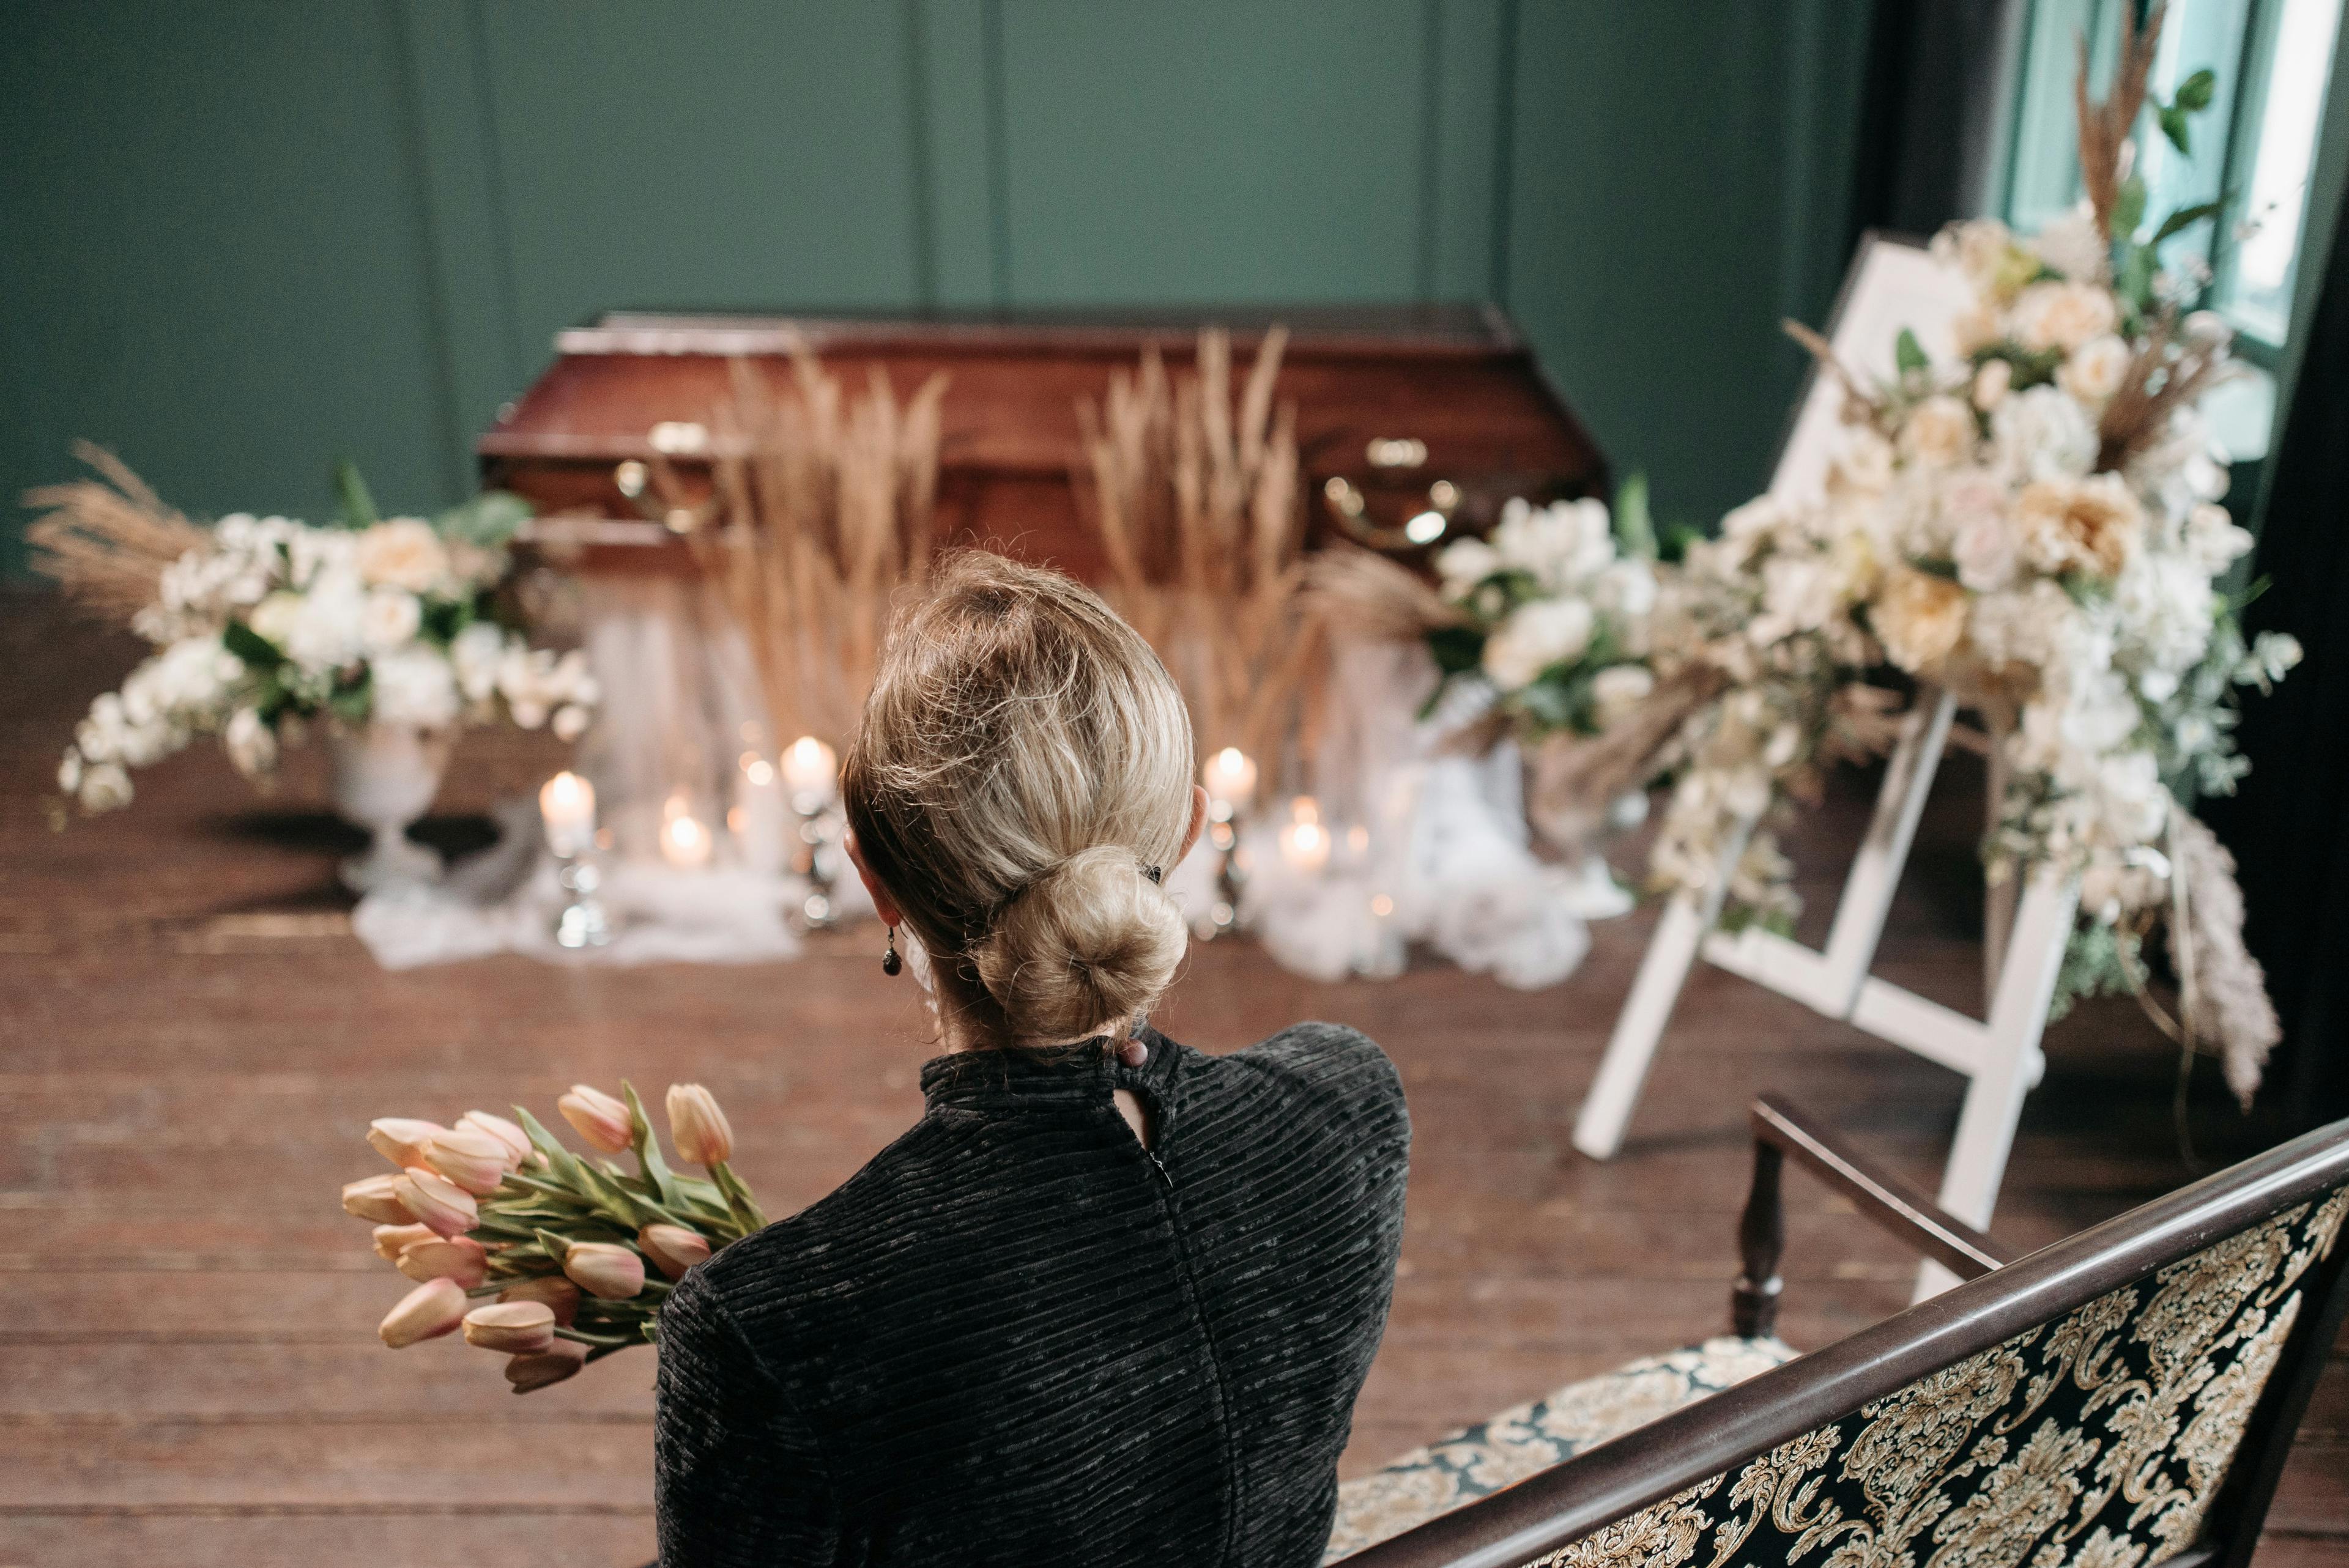 Step-by-step Guide to Arranging a Funeral Service